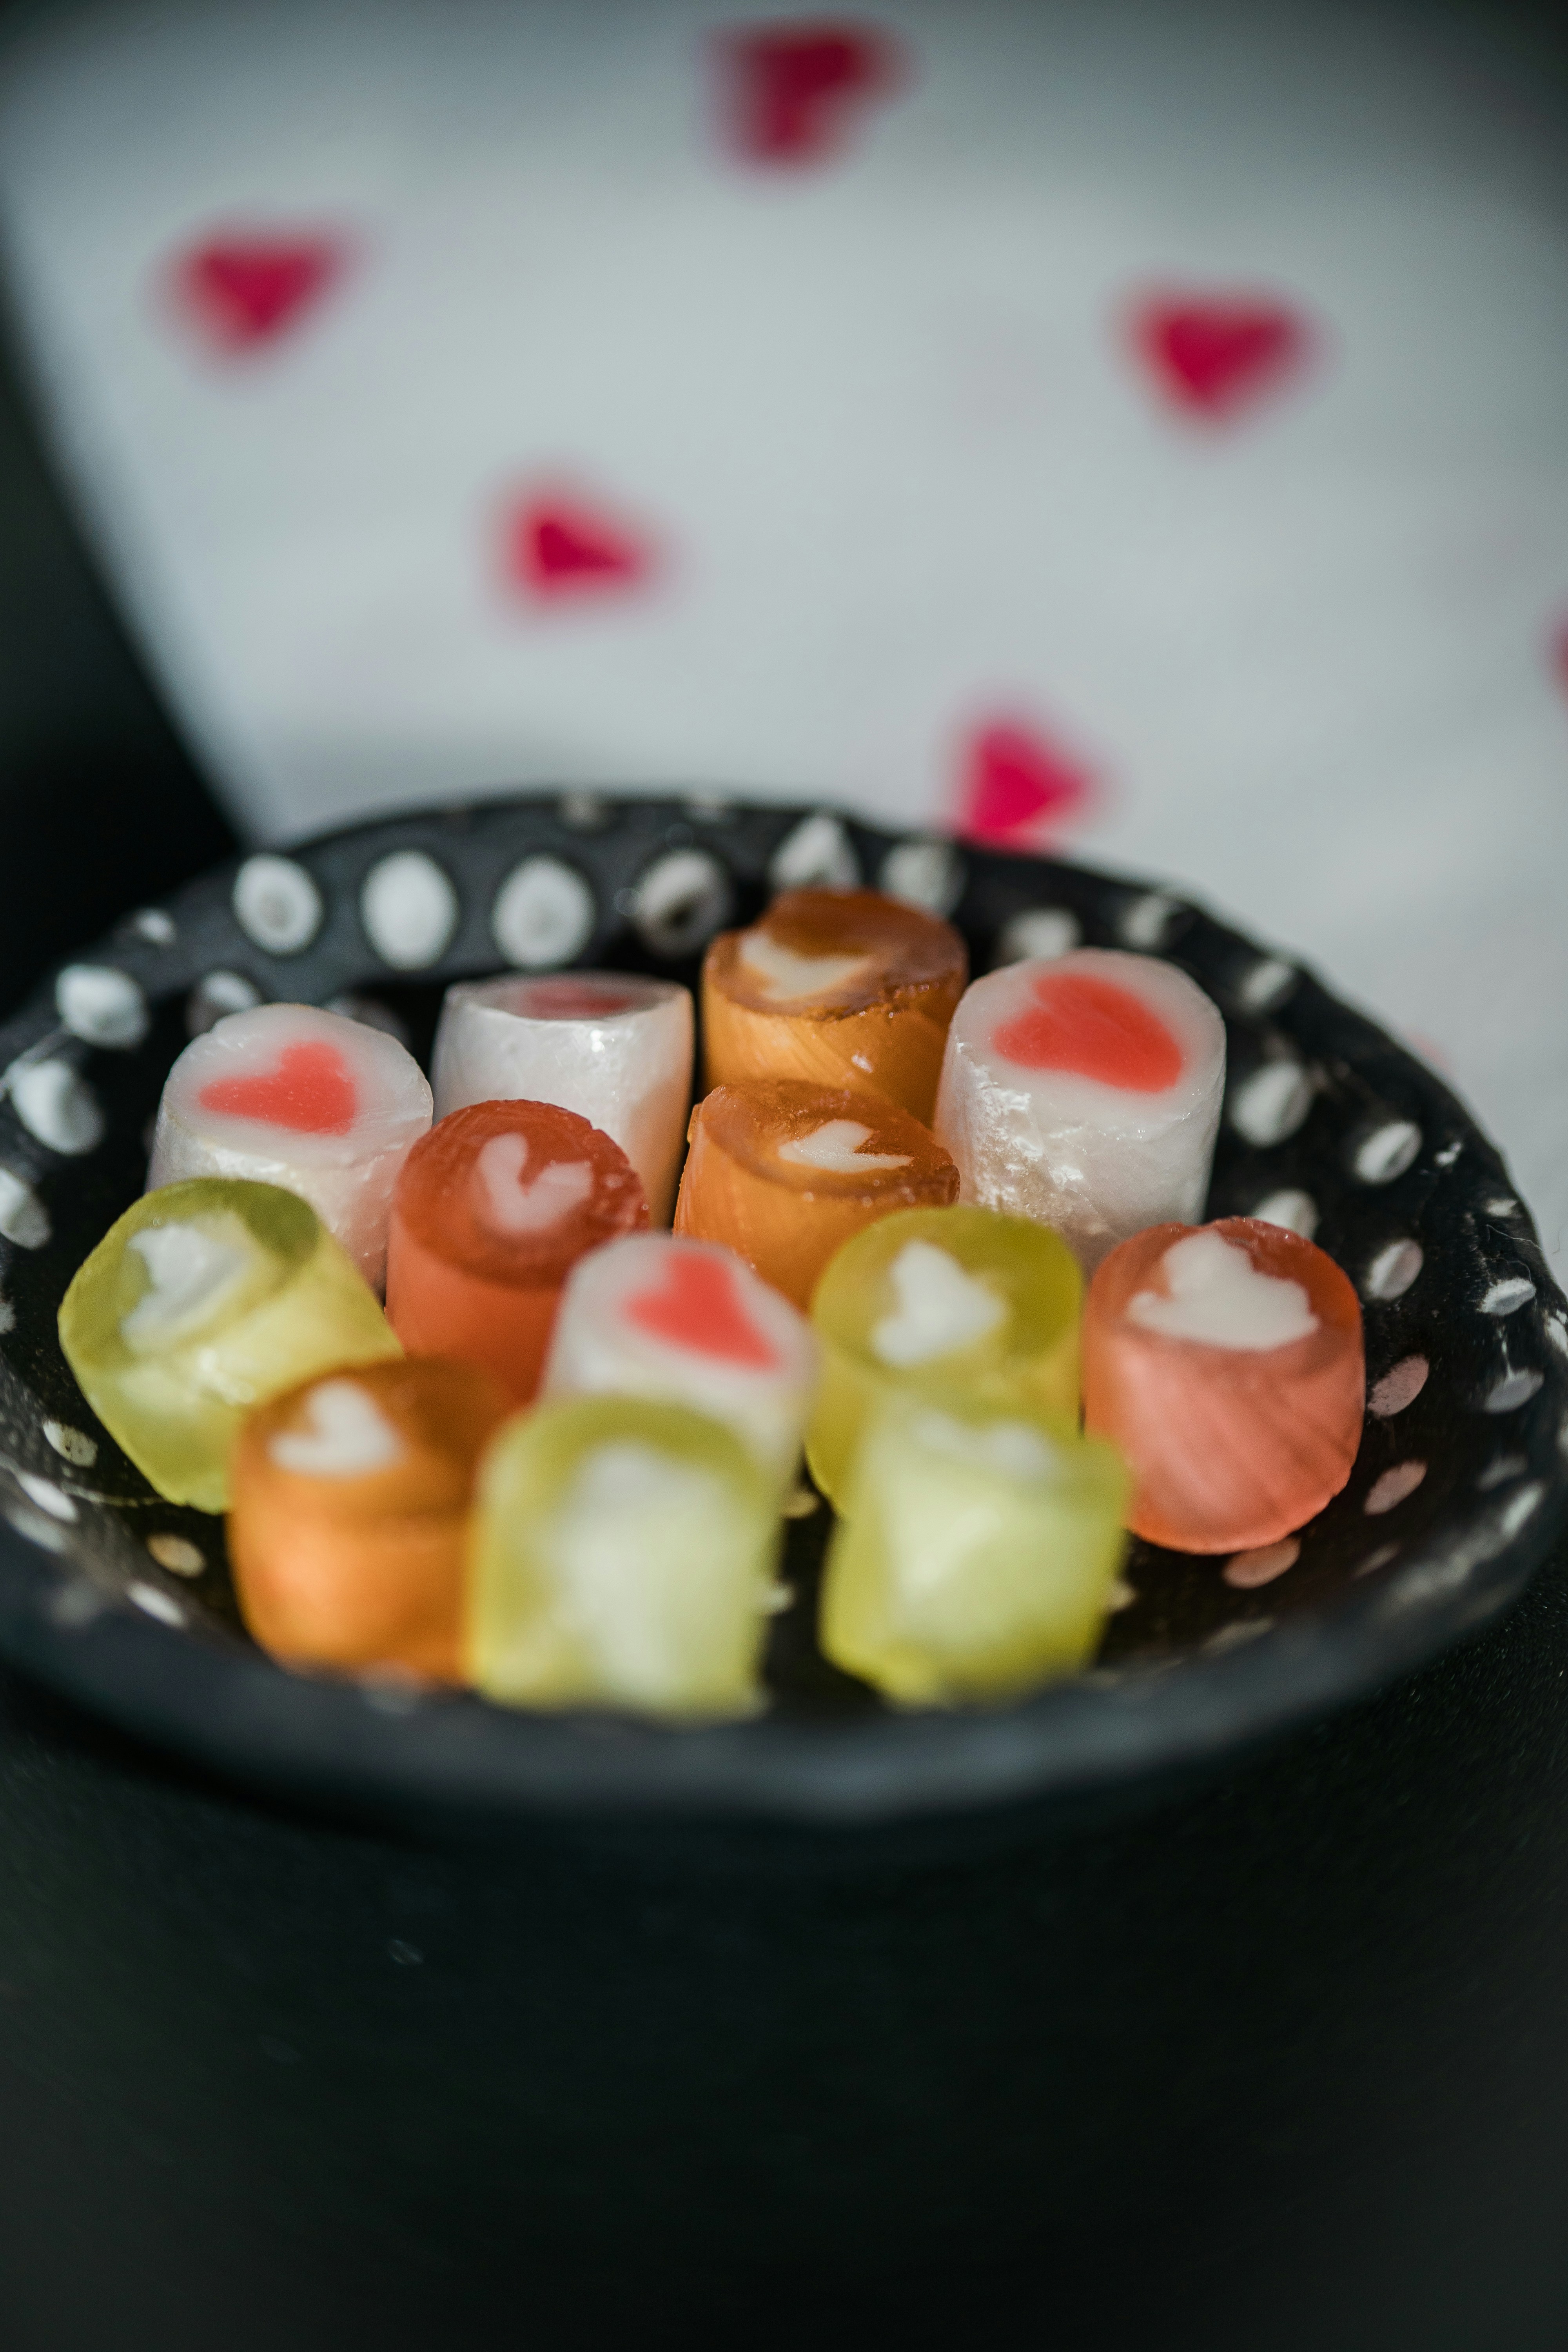 A handmade dish of small heart-themed candy